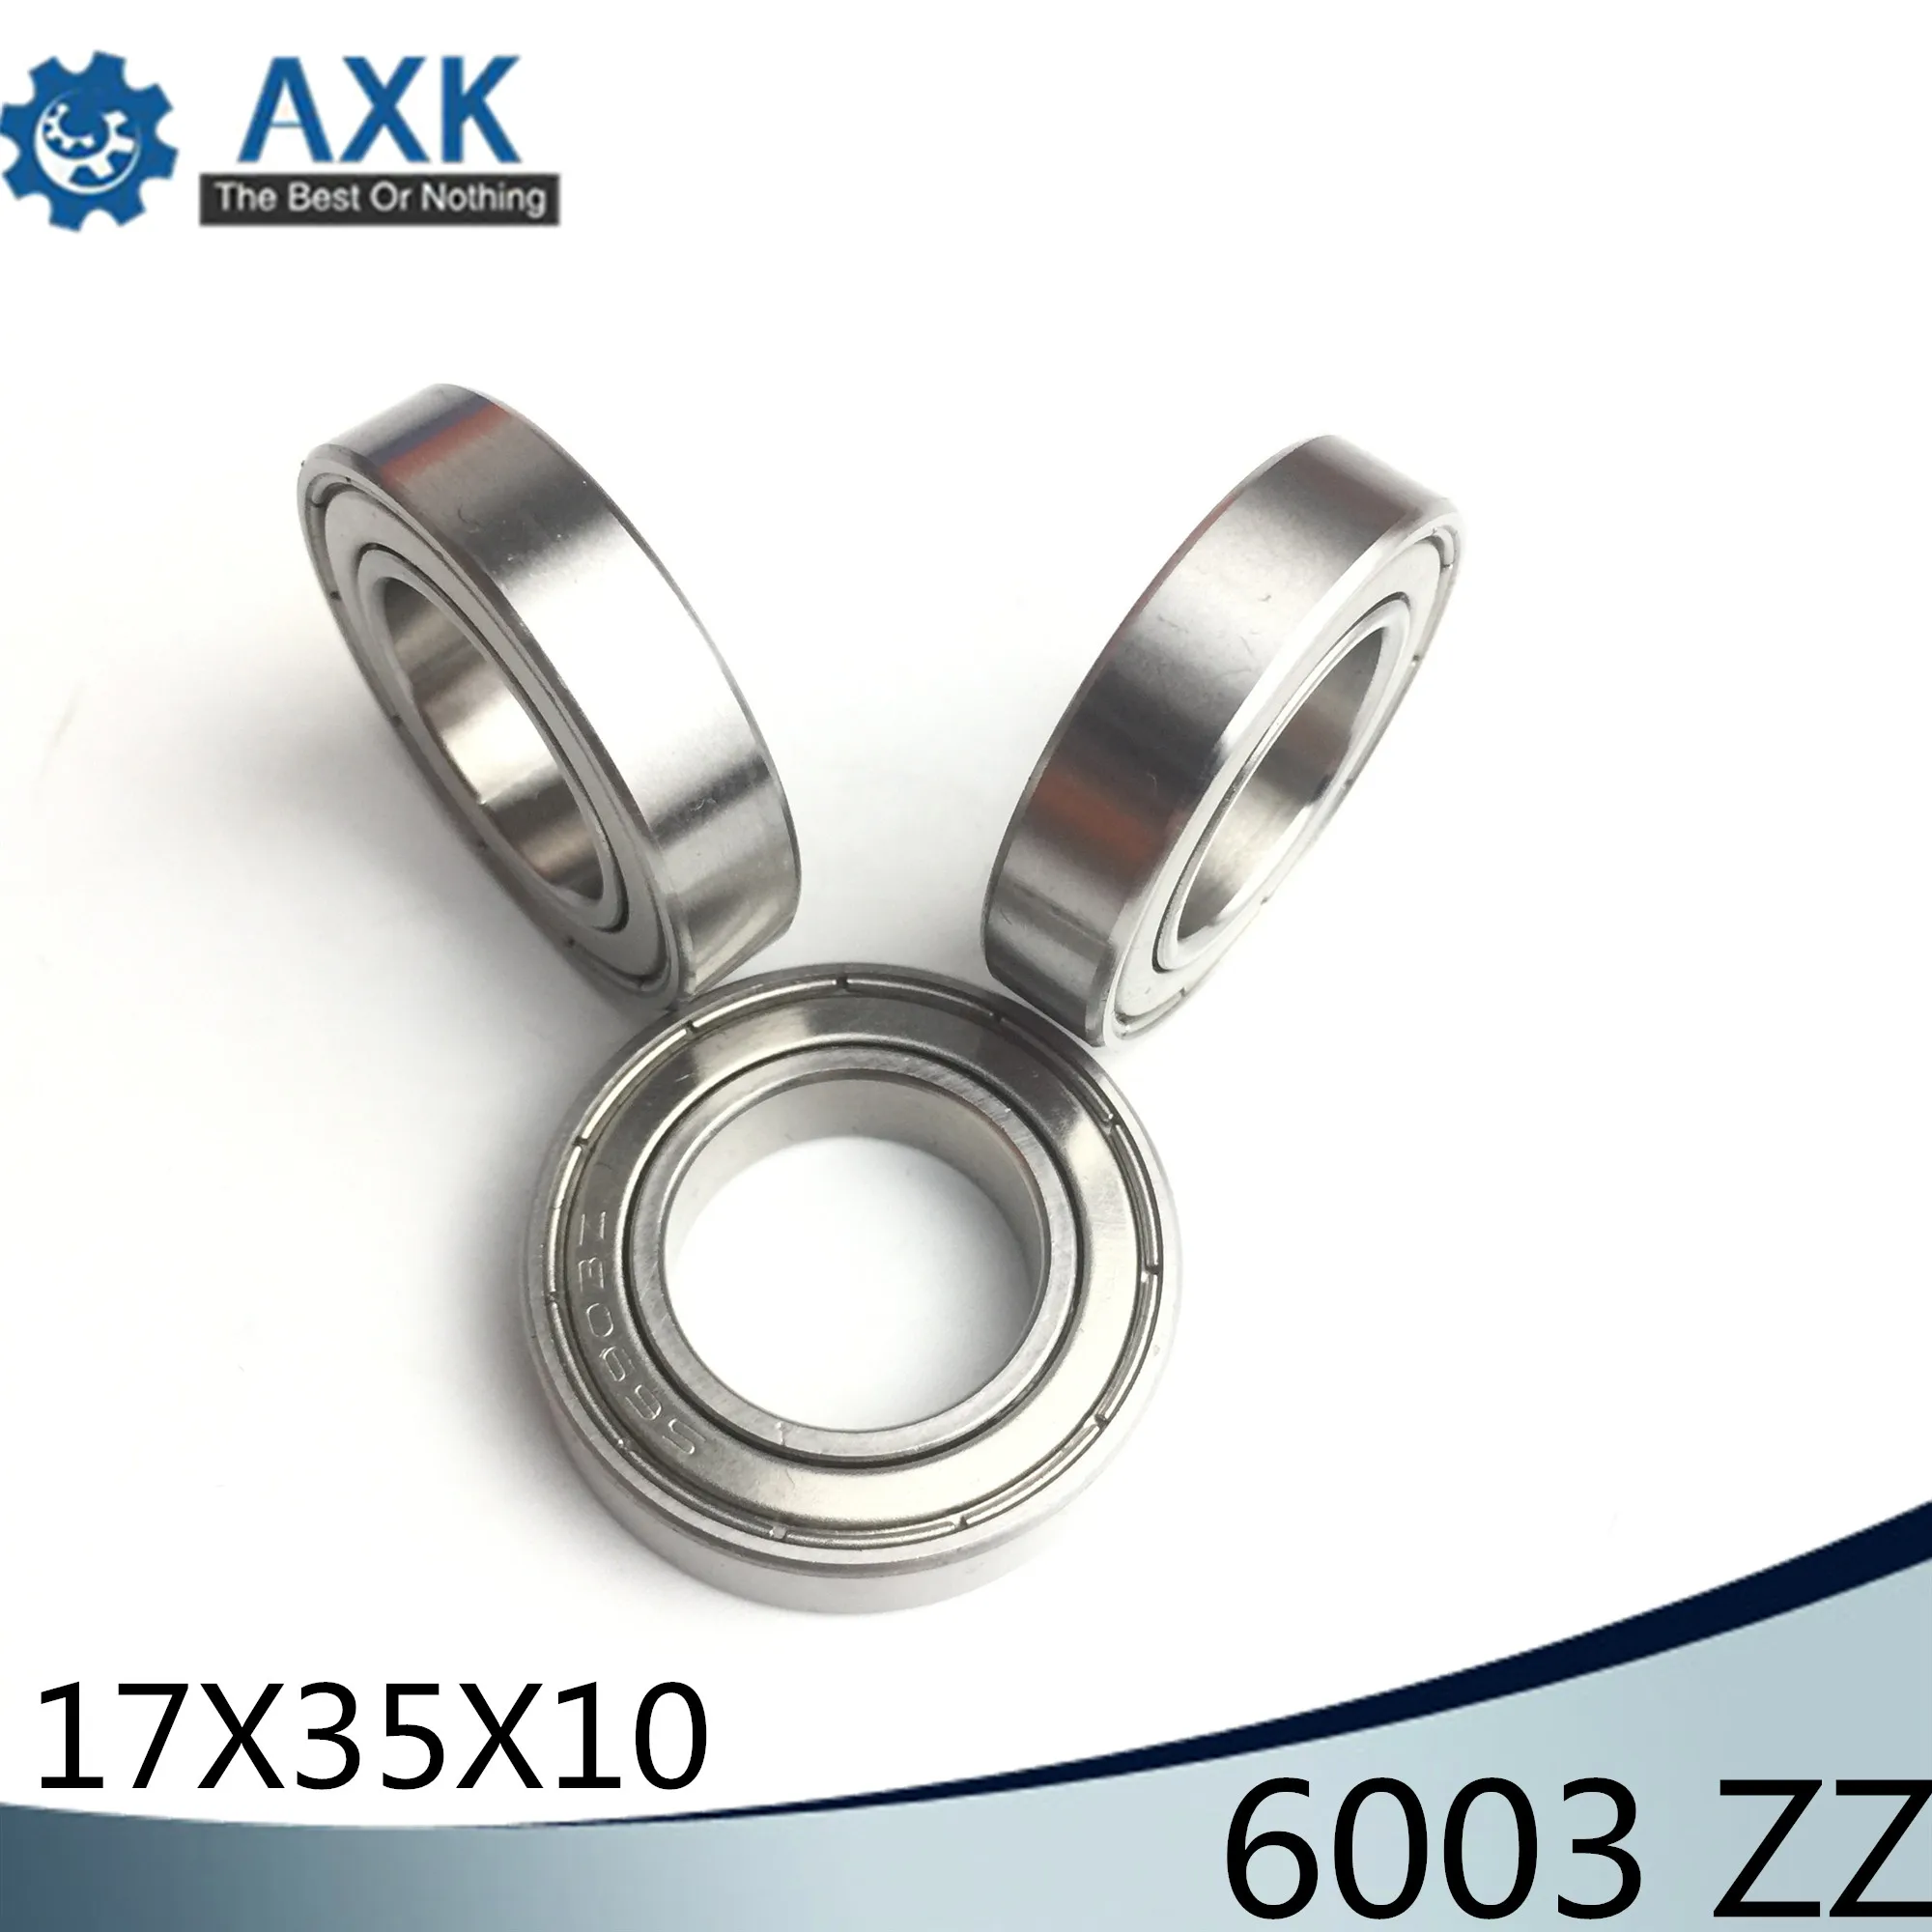 6003ZZ Bearing 17*35*10 mm ABEC-3 ( 6 PCS ) For Blower Vacuums Saw Trimmer Deep Groove 6003 Z ZZ Ball Bearings 6003Z